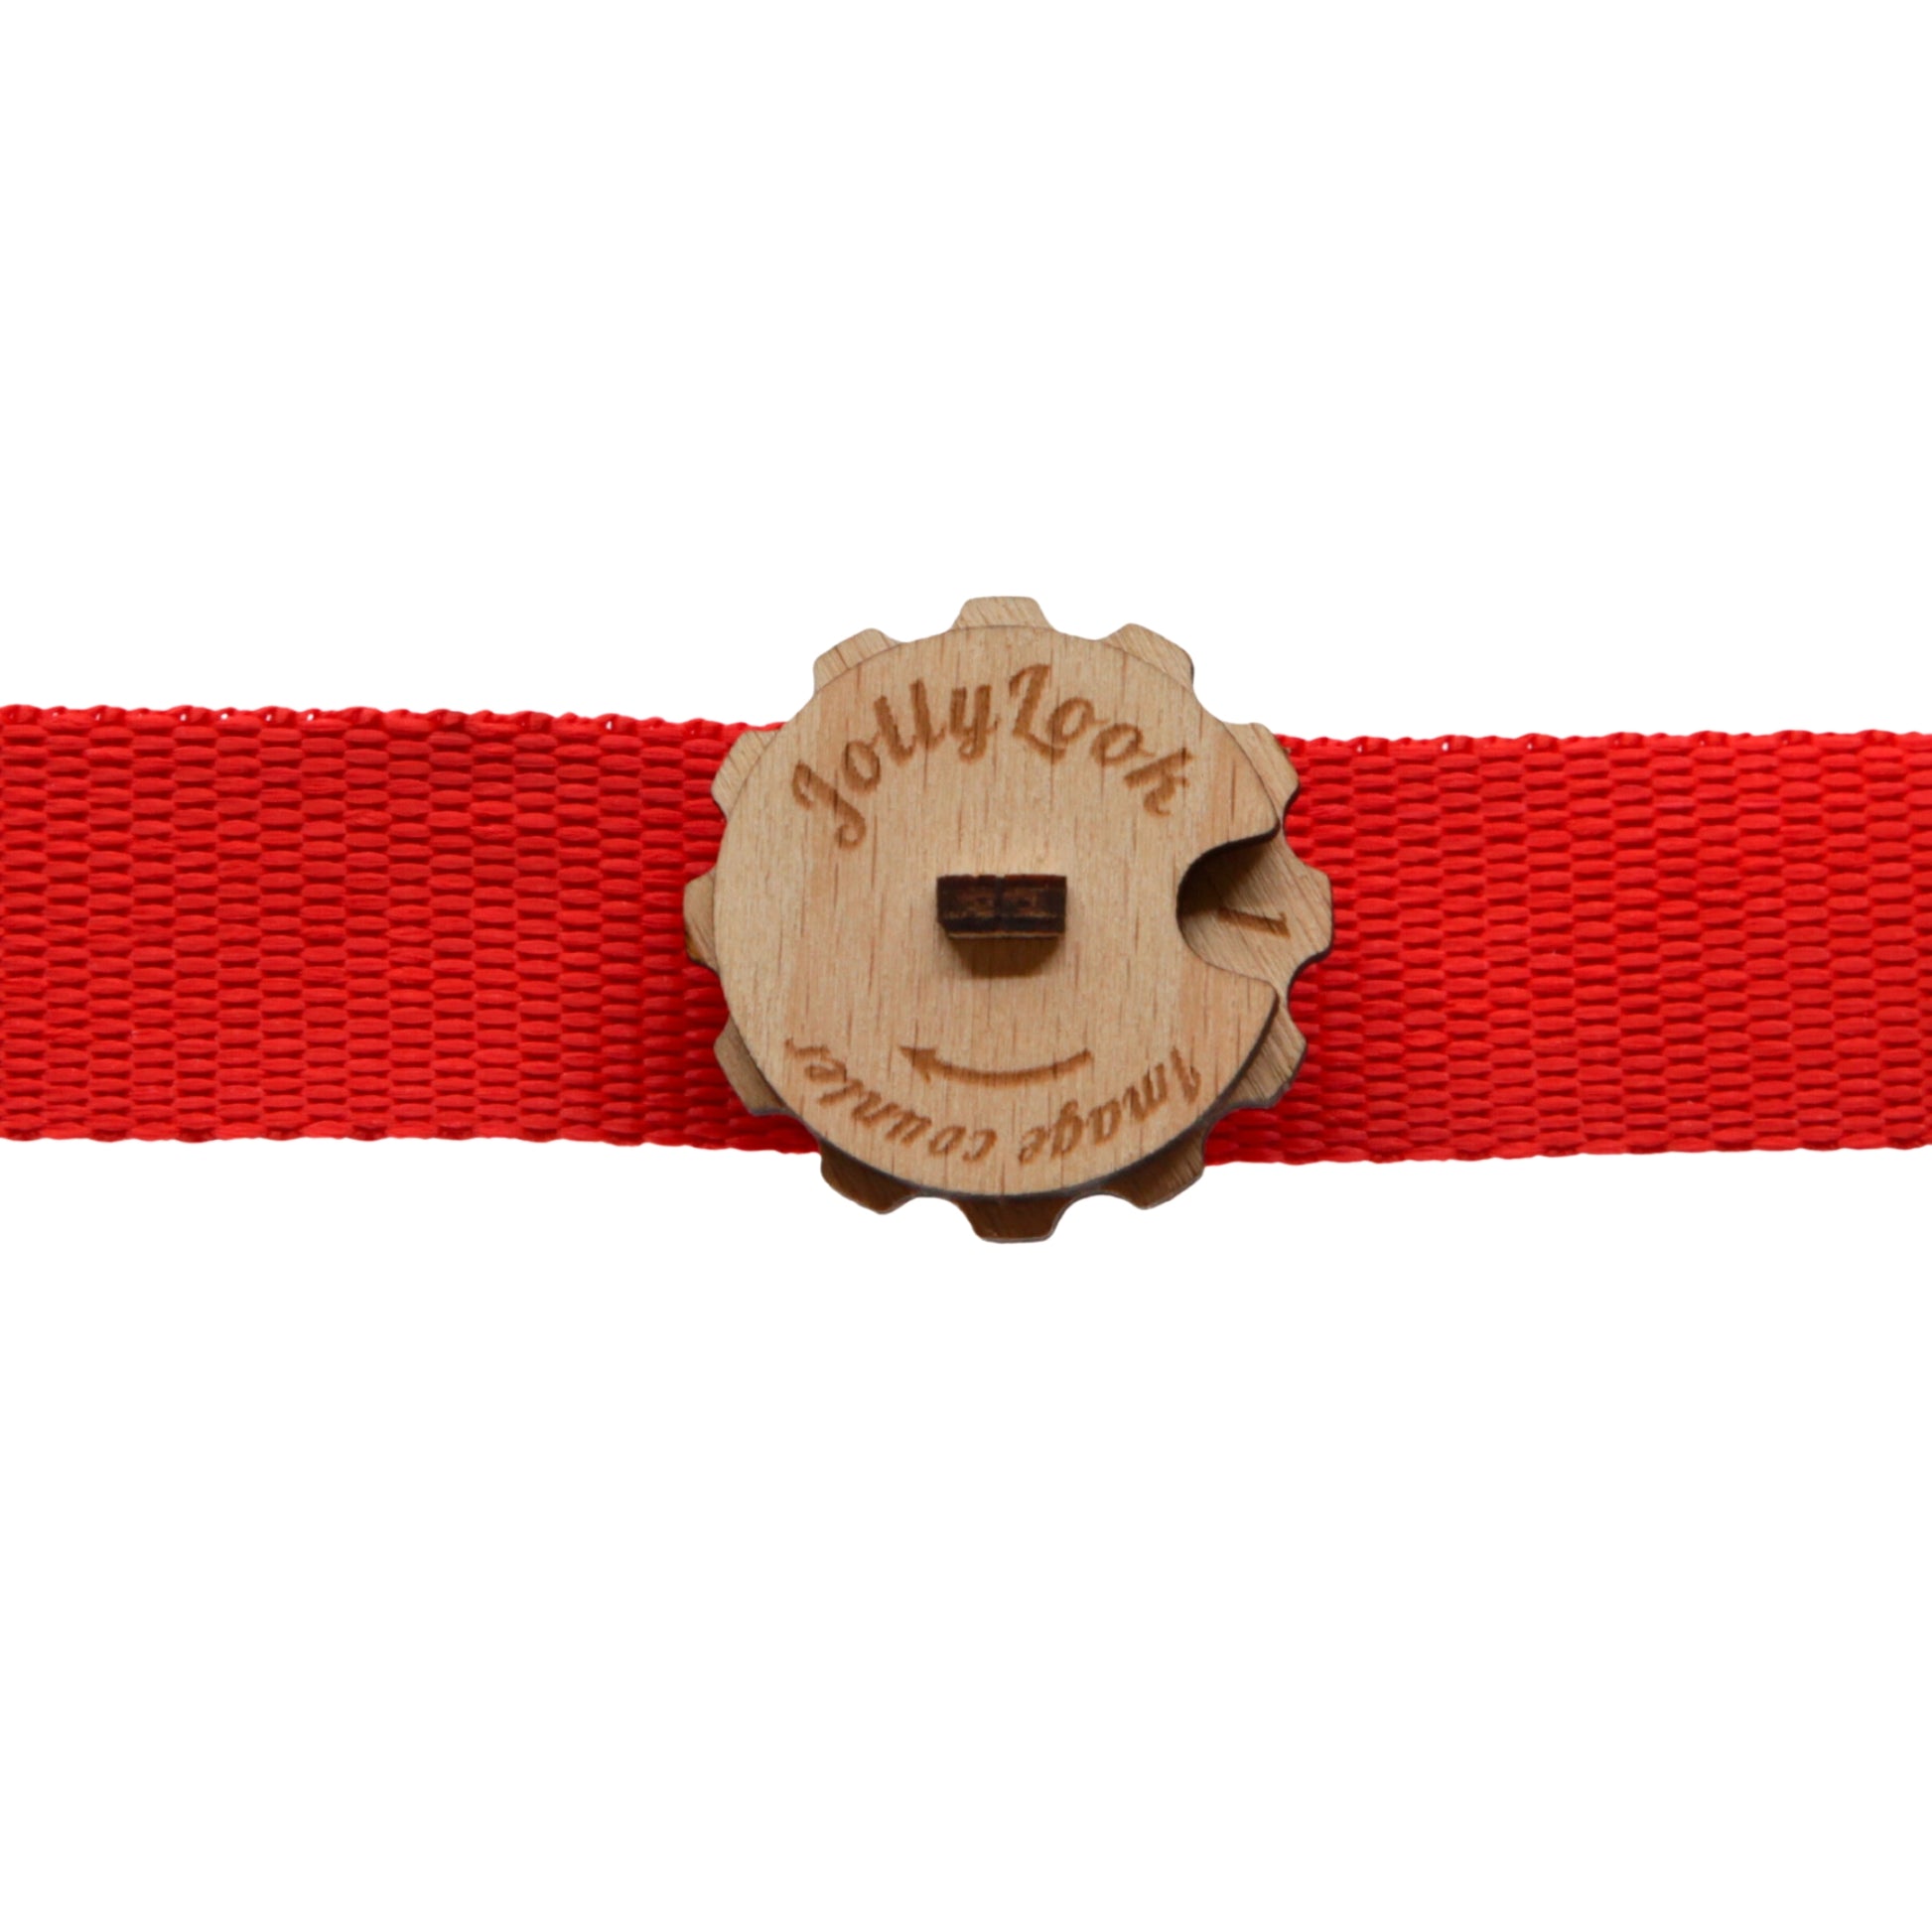 A round wooden image counter in Natural Wood Color featuring the Jollylook logo on a red strap for keeping track of how many images remain in your Instax film cartridge